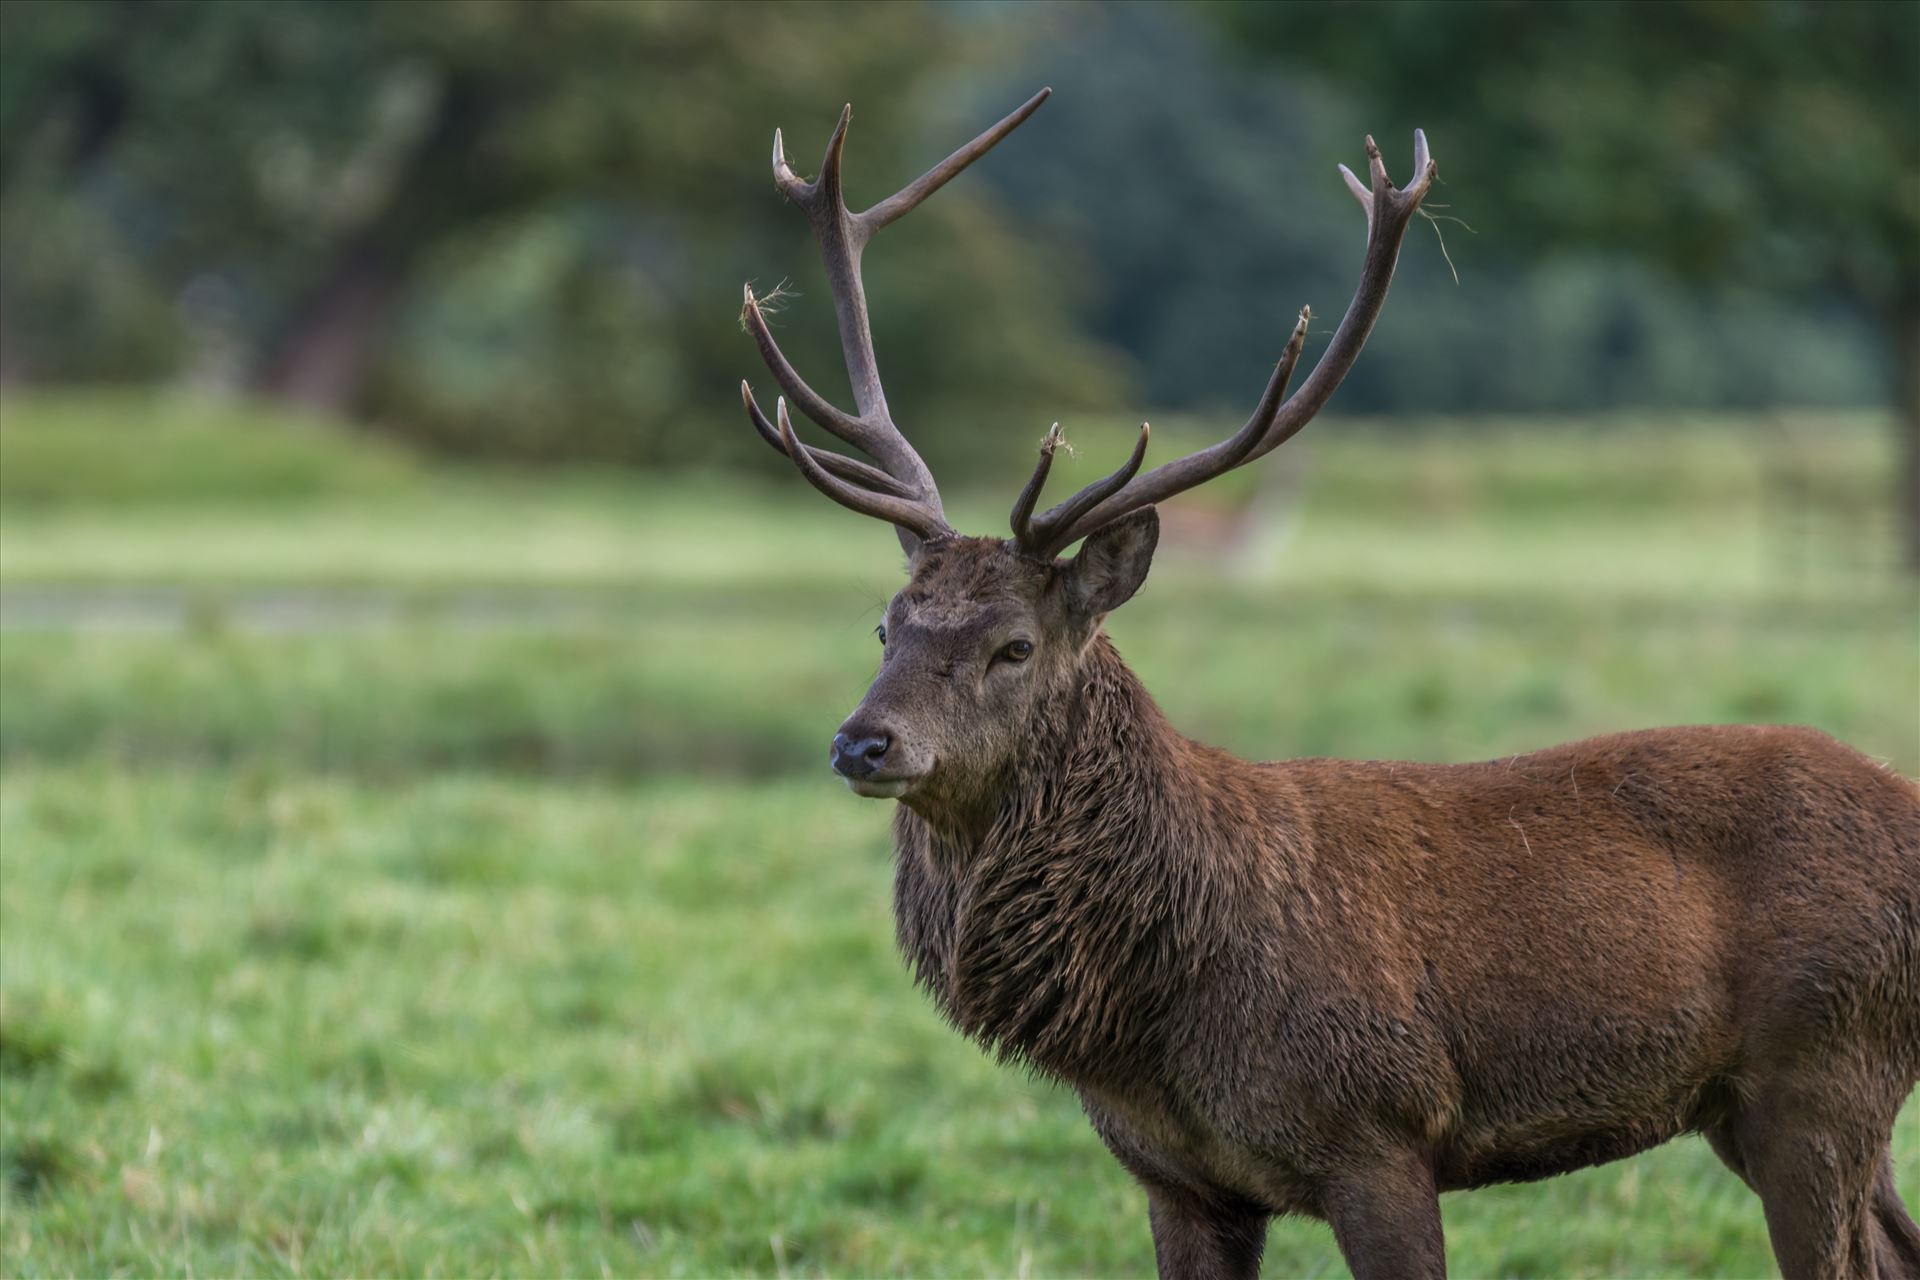 Red deer stag - Taken at Studley Royal deer park, nr Fountains Abbey, Ripon. by philreay